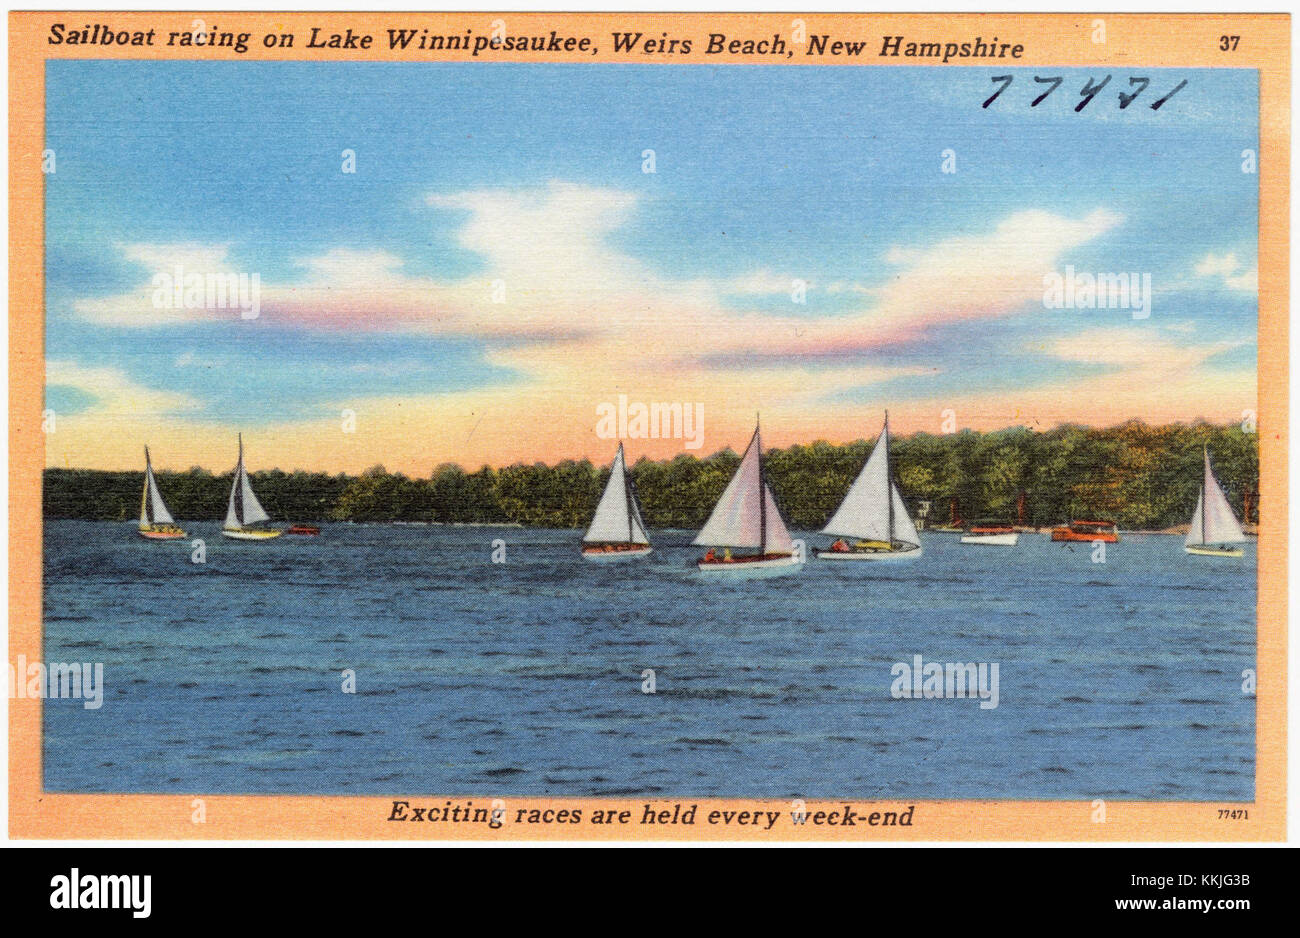 Sailboat racing on Lake Winnipesaukee, Weirs Beach, New Hampshire, exciting races are held every week-end (77421) Stock Photo